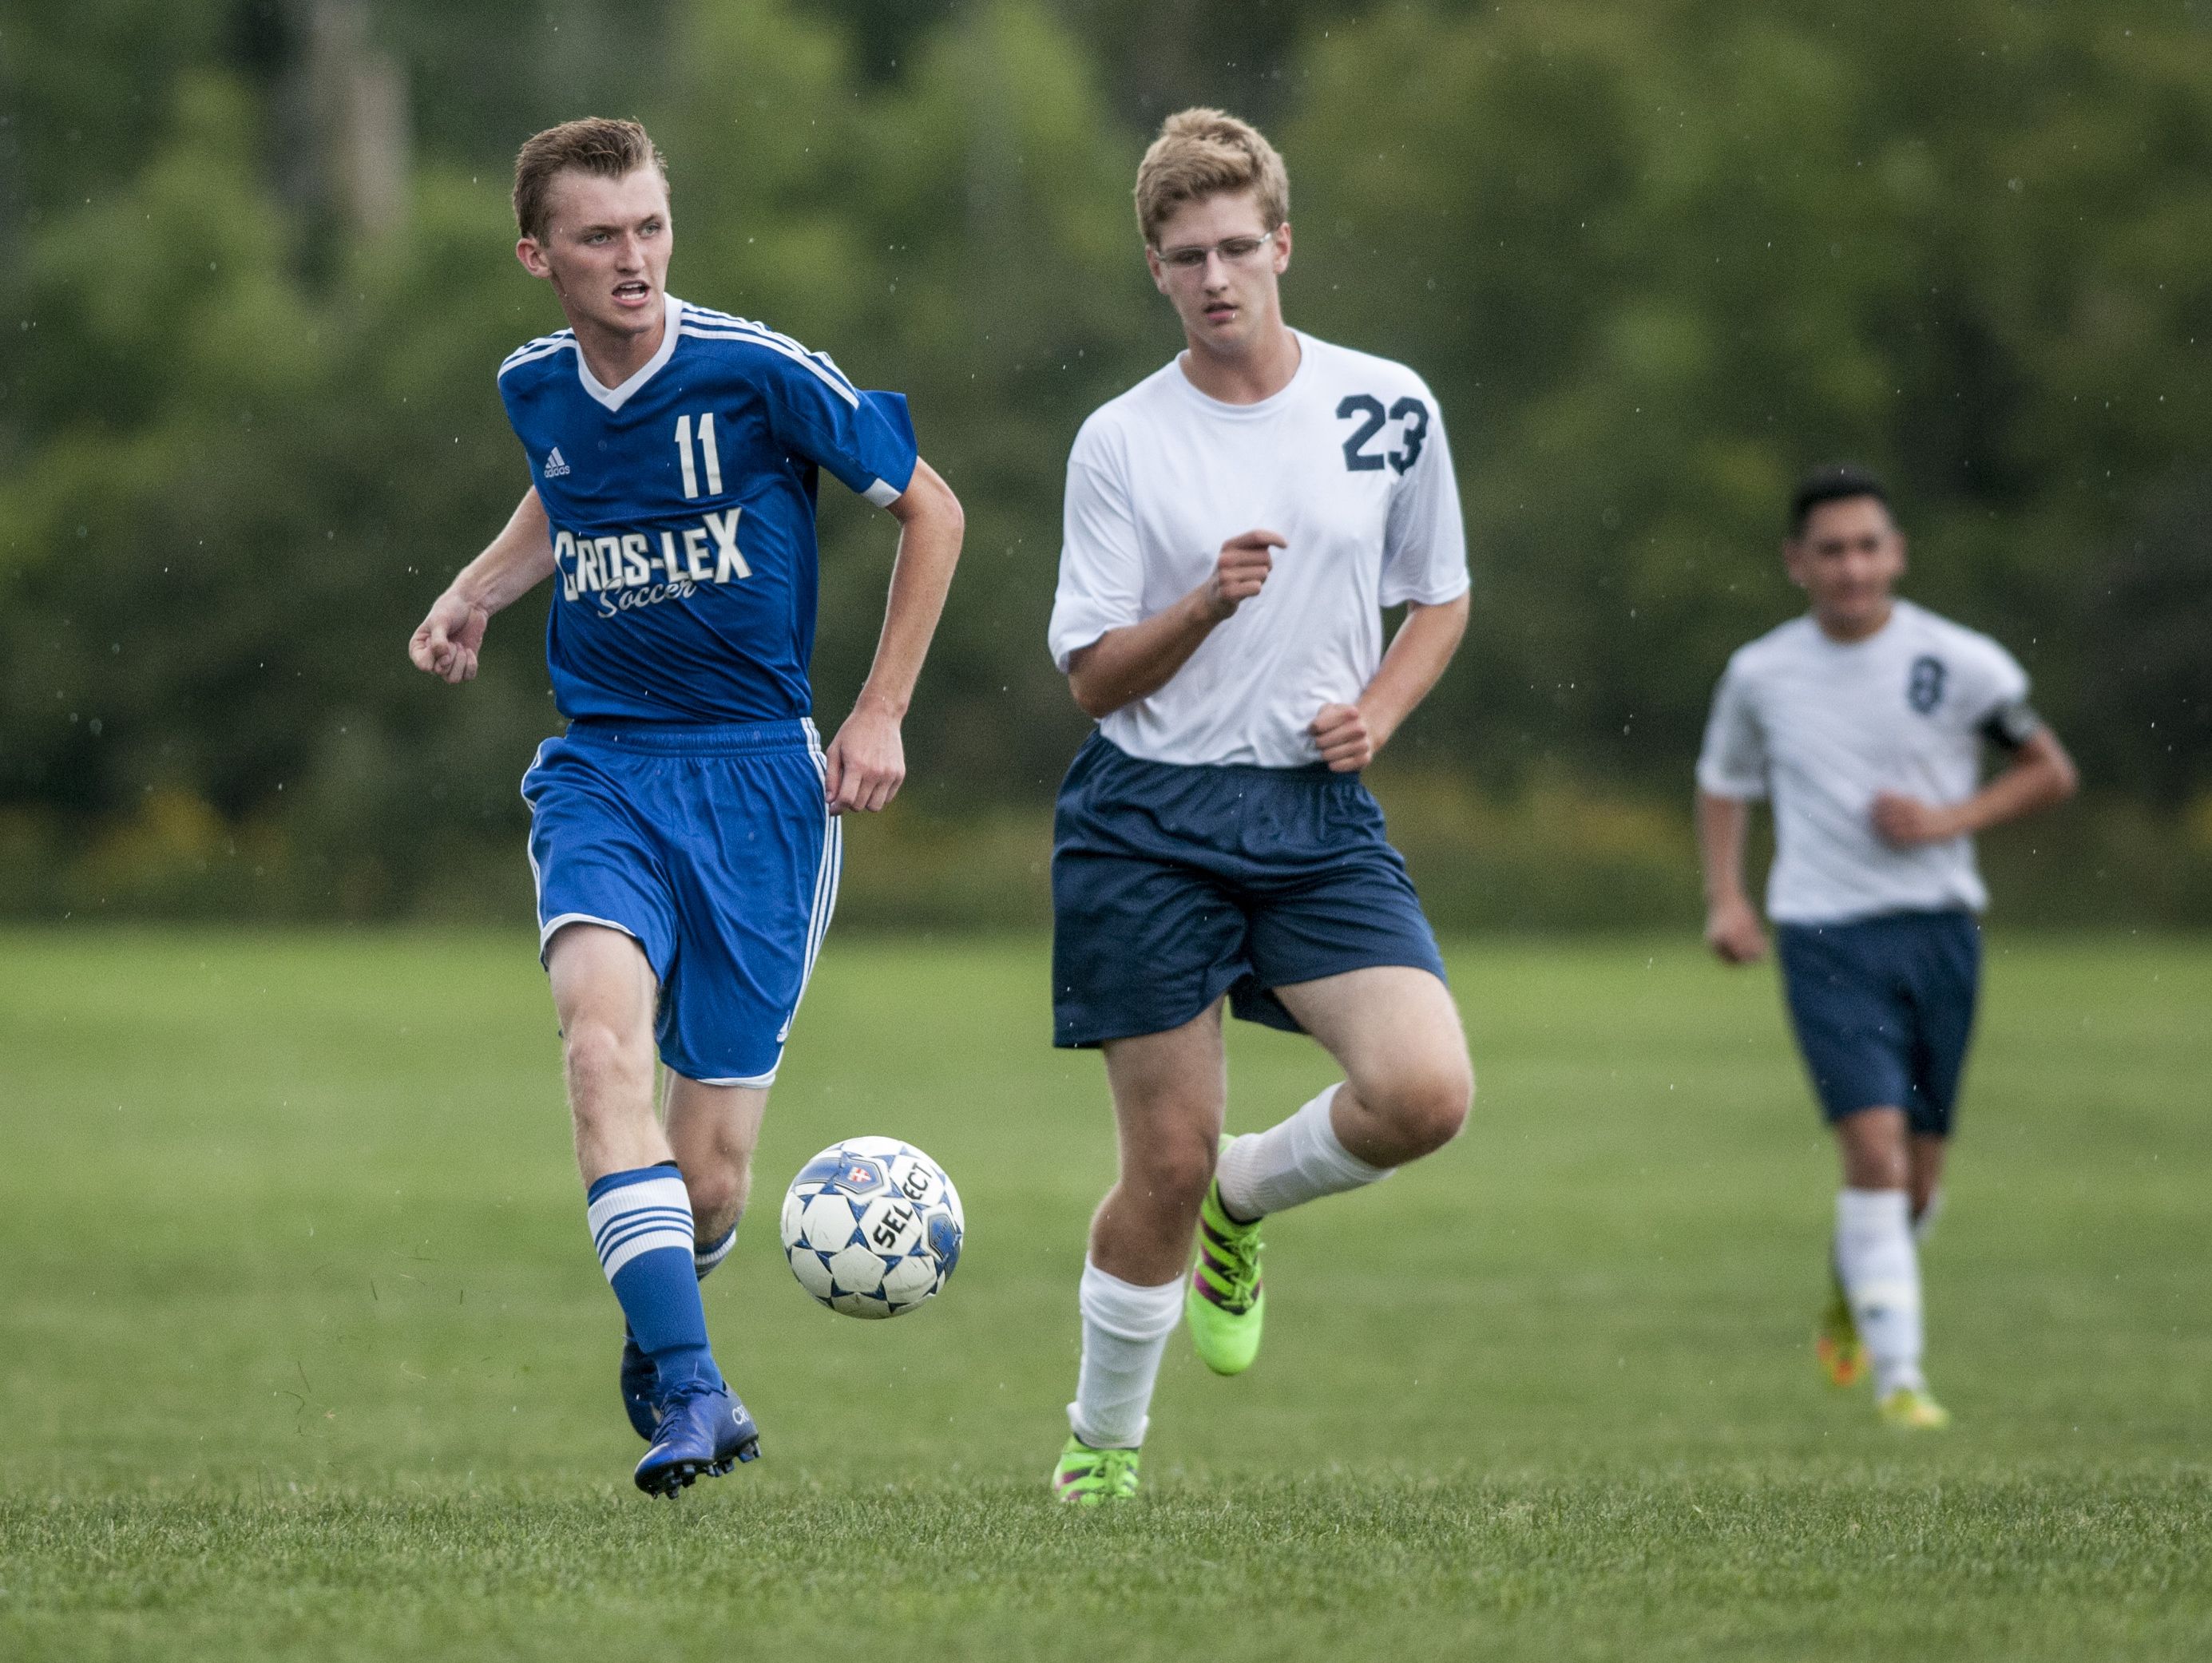 Cros-Lex's Hunter Rankin passes the ball in front of Capac's Austin Lowien during a soccer game Wednesday, September 7, 2016 at Capac High School.